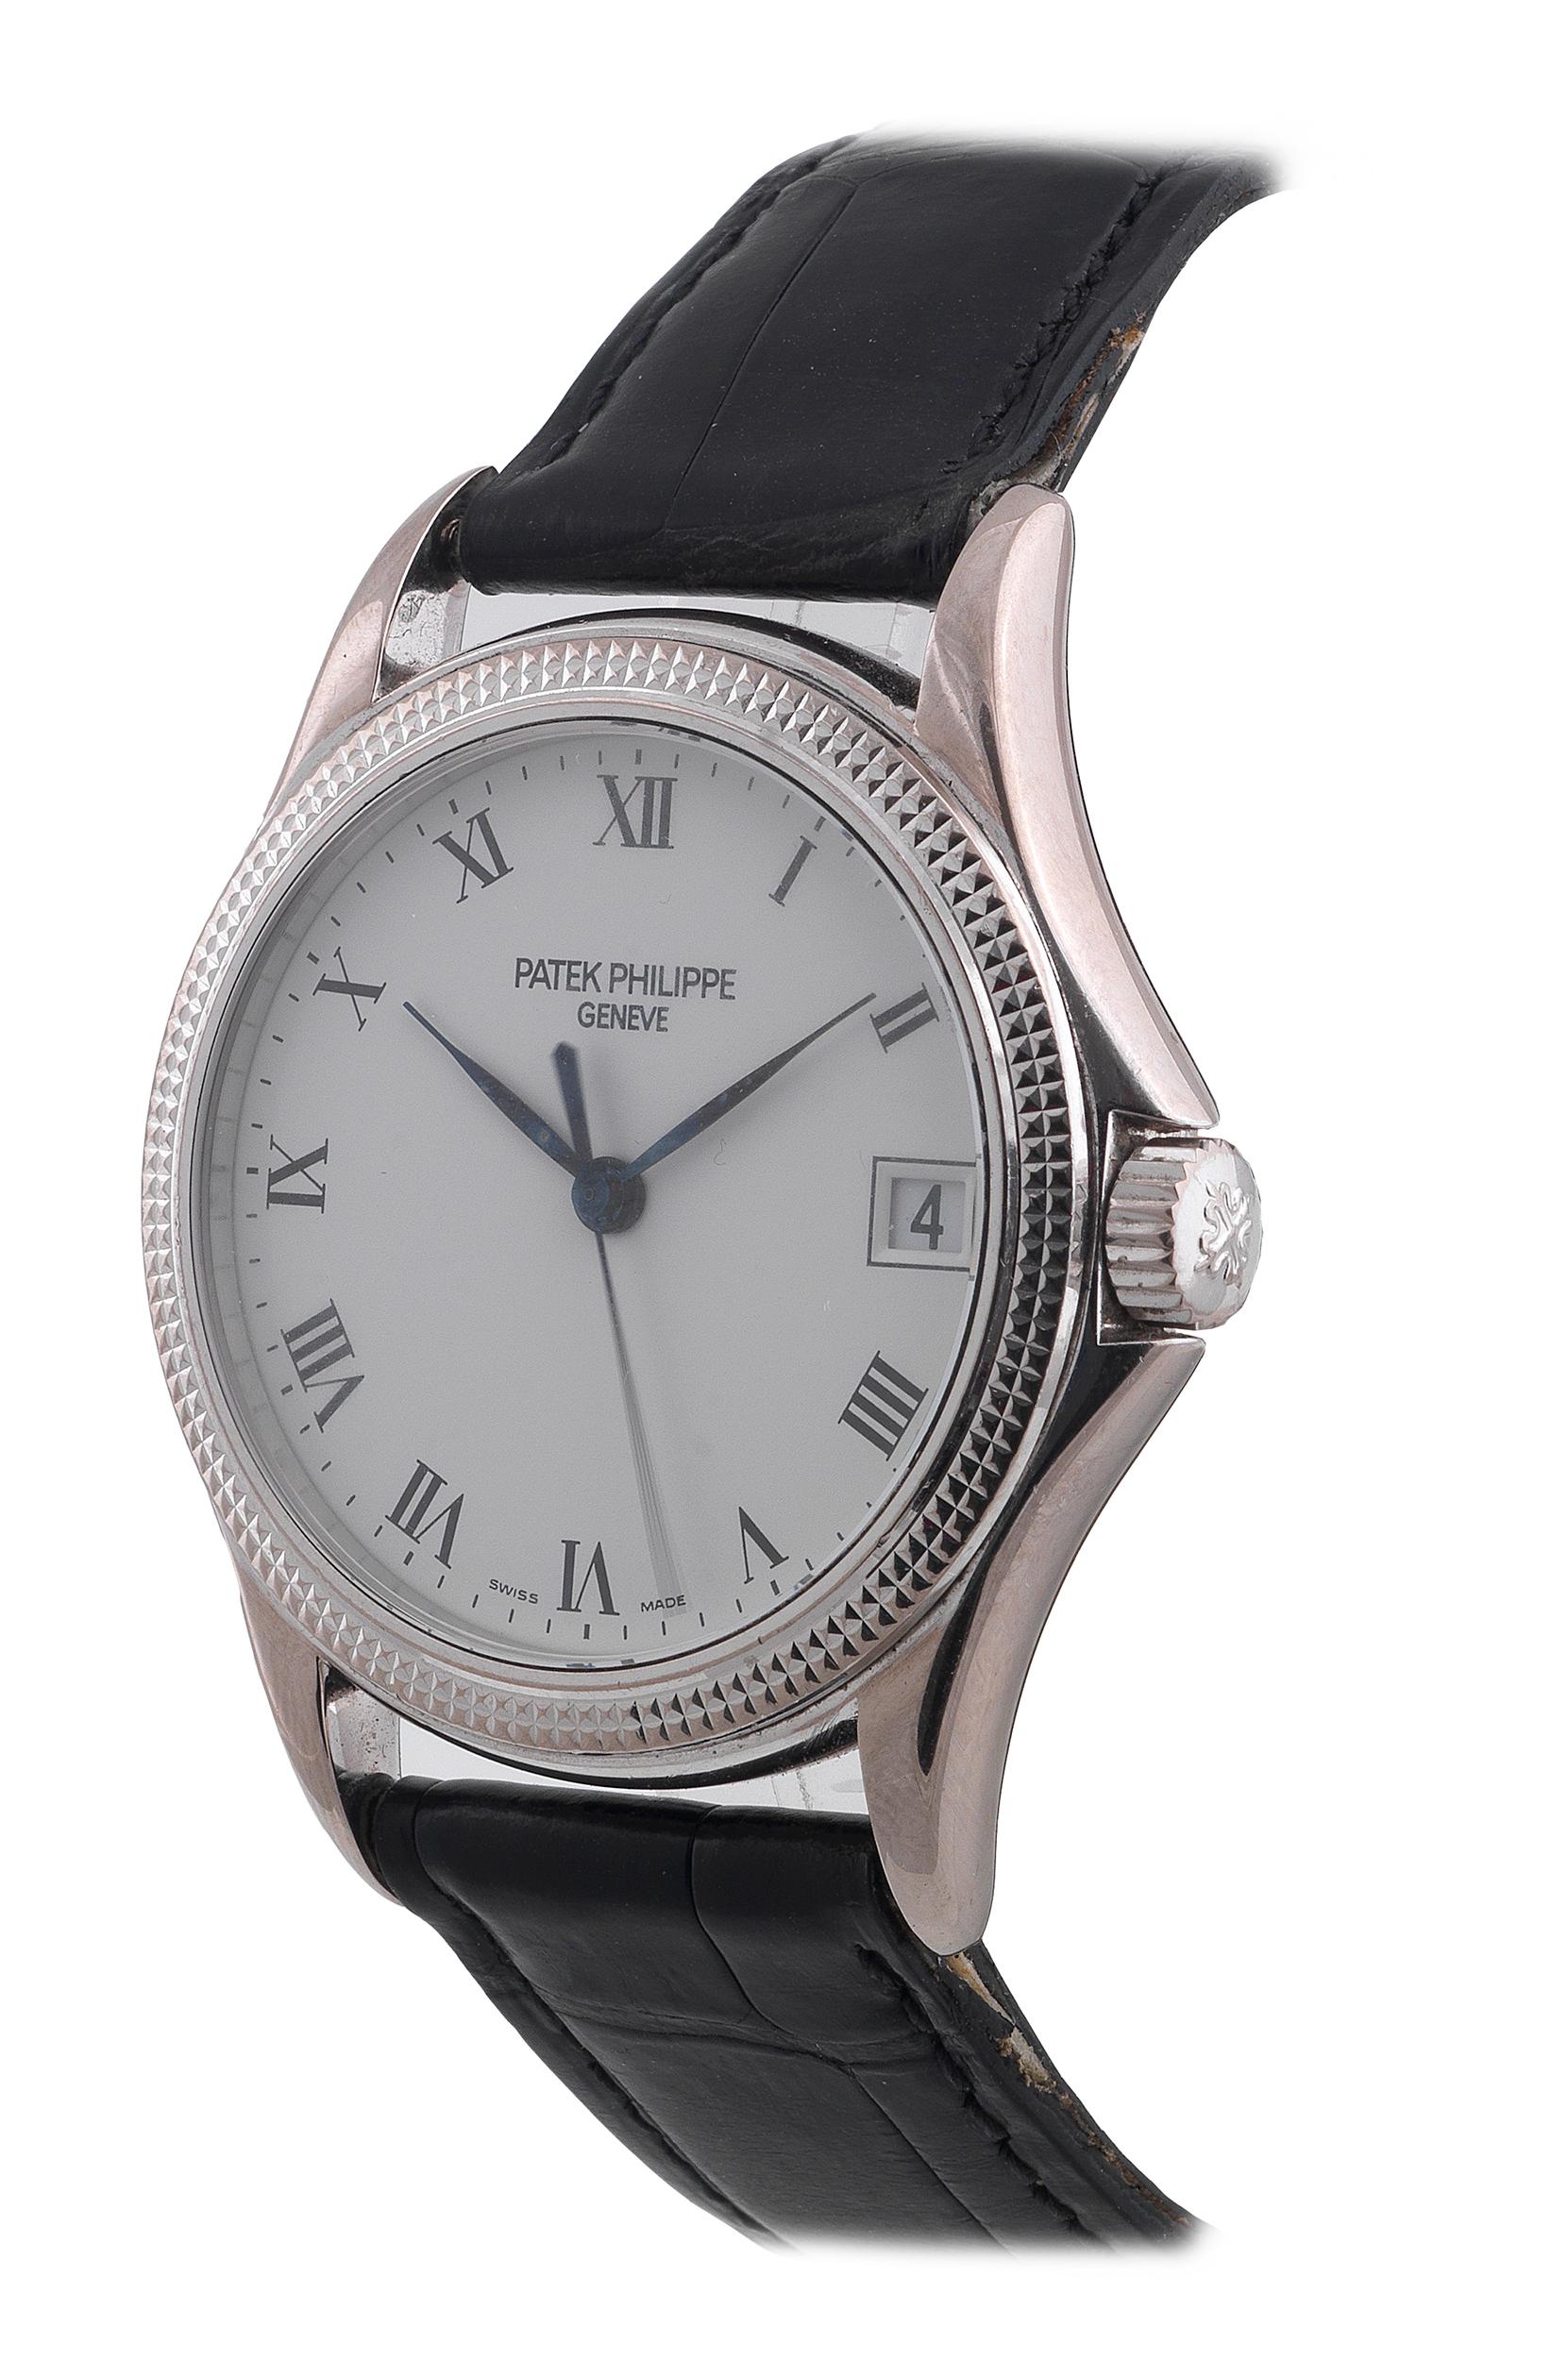 Fine, self-winding, water-resistant, 18K white gold gentleman's wristwatch with centre seconds, date and 18K white gold Patek Philippe buckle.
Case Two-body, polished, hobnail bezel, concave lugs,protected screwed-down winding crown and